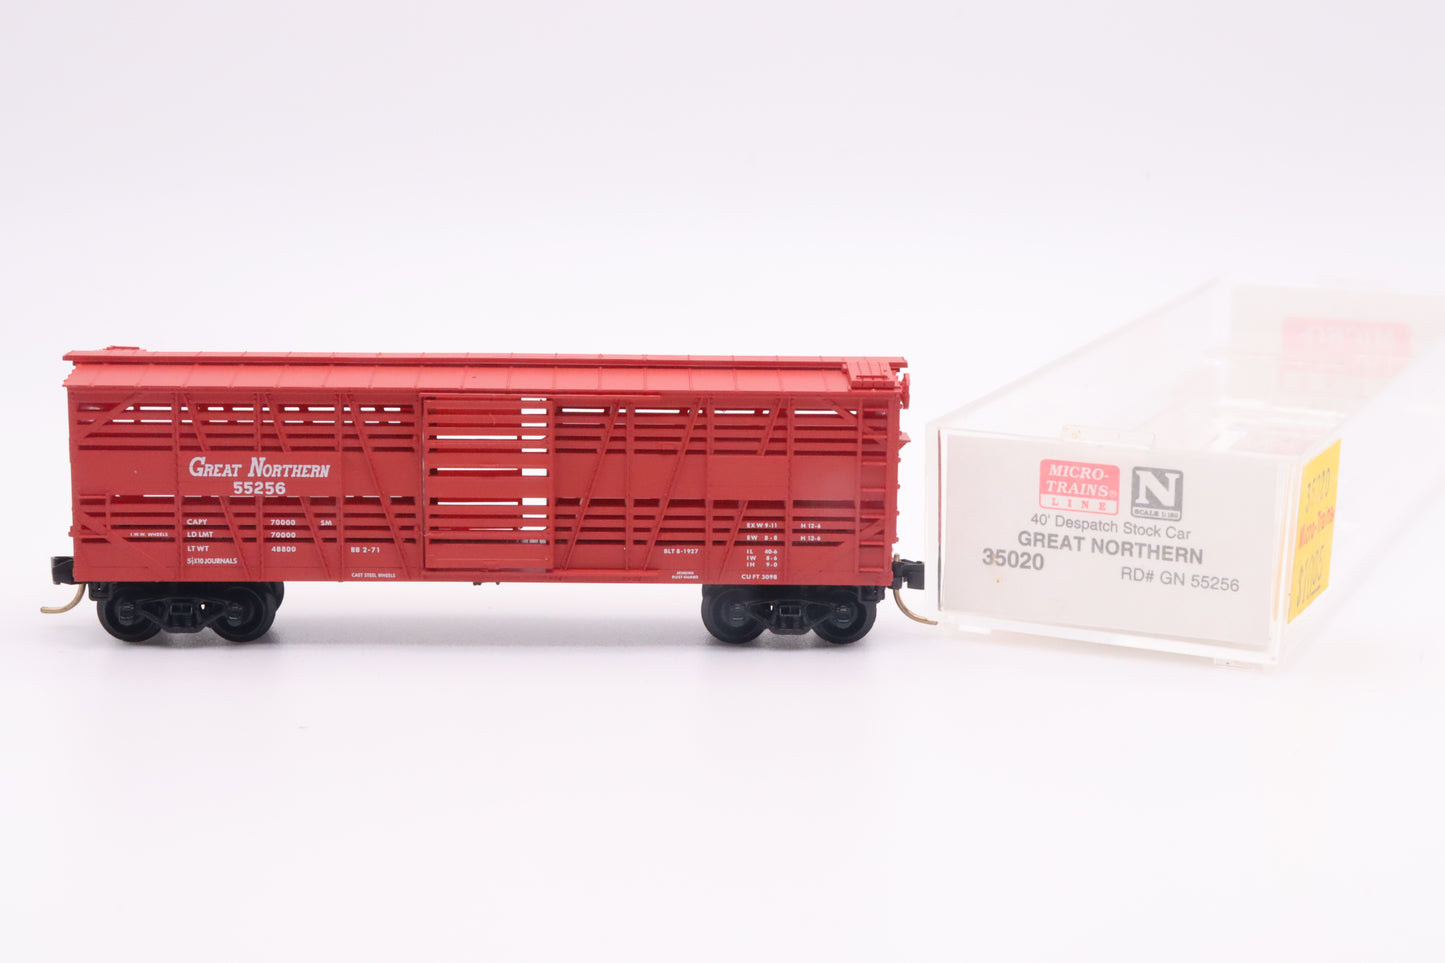 MTL-35020 - 40' Despatch Stock Car - Great Northern - GN-55256